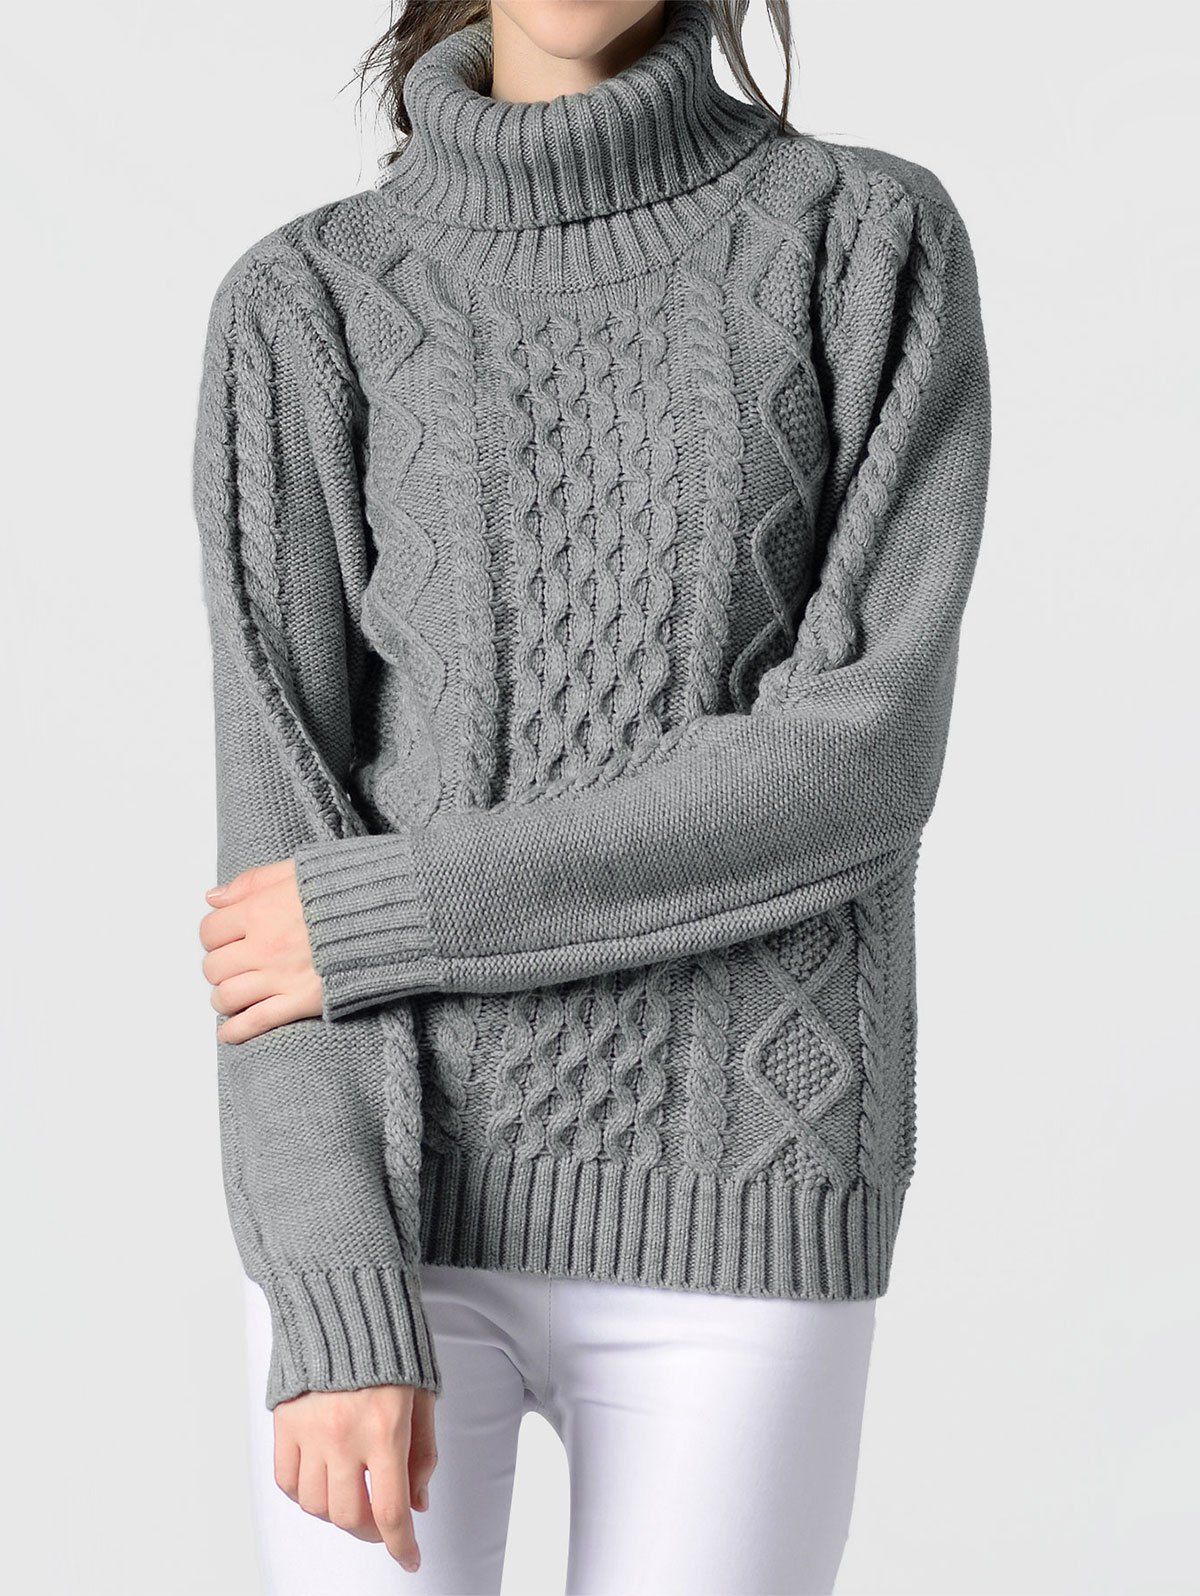 [31% OFF] 2021 Turtleneck Cable Knit Solid Sweater In GRAY | DressLily